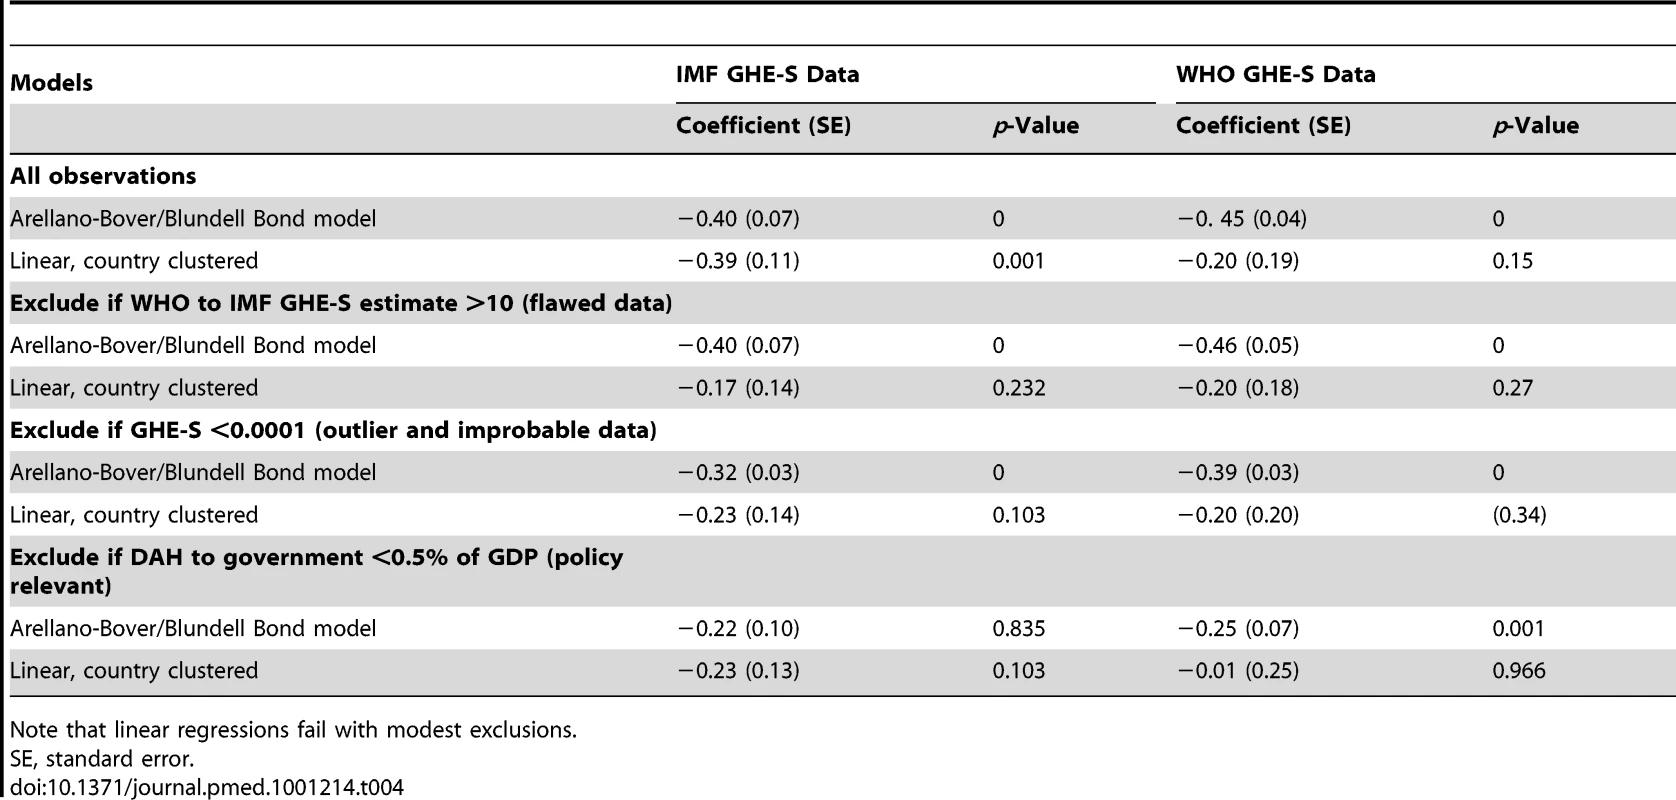 Summary of regressions, with GHE-S/GDP as dependent variable, DAH to governments/GDP as independent variable.